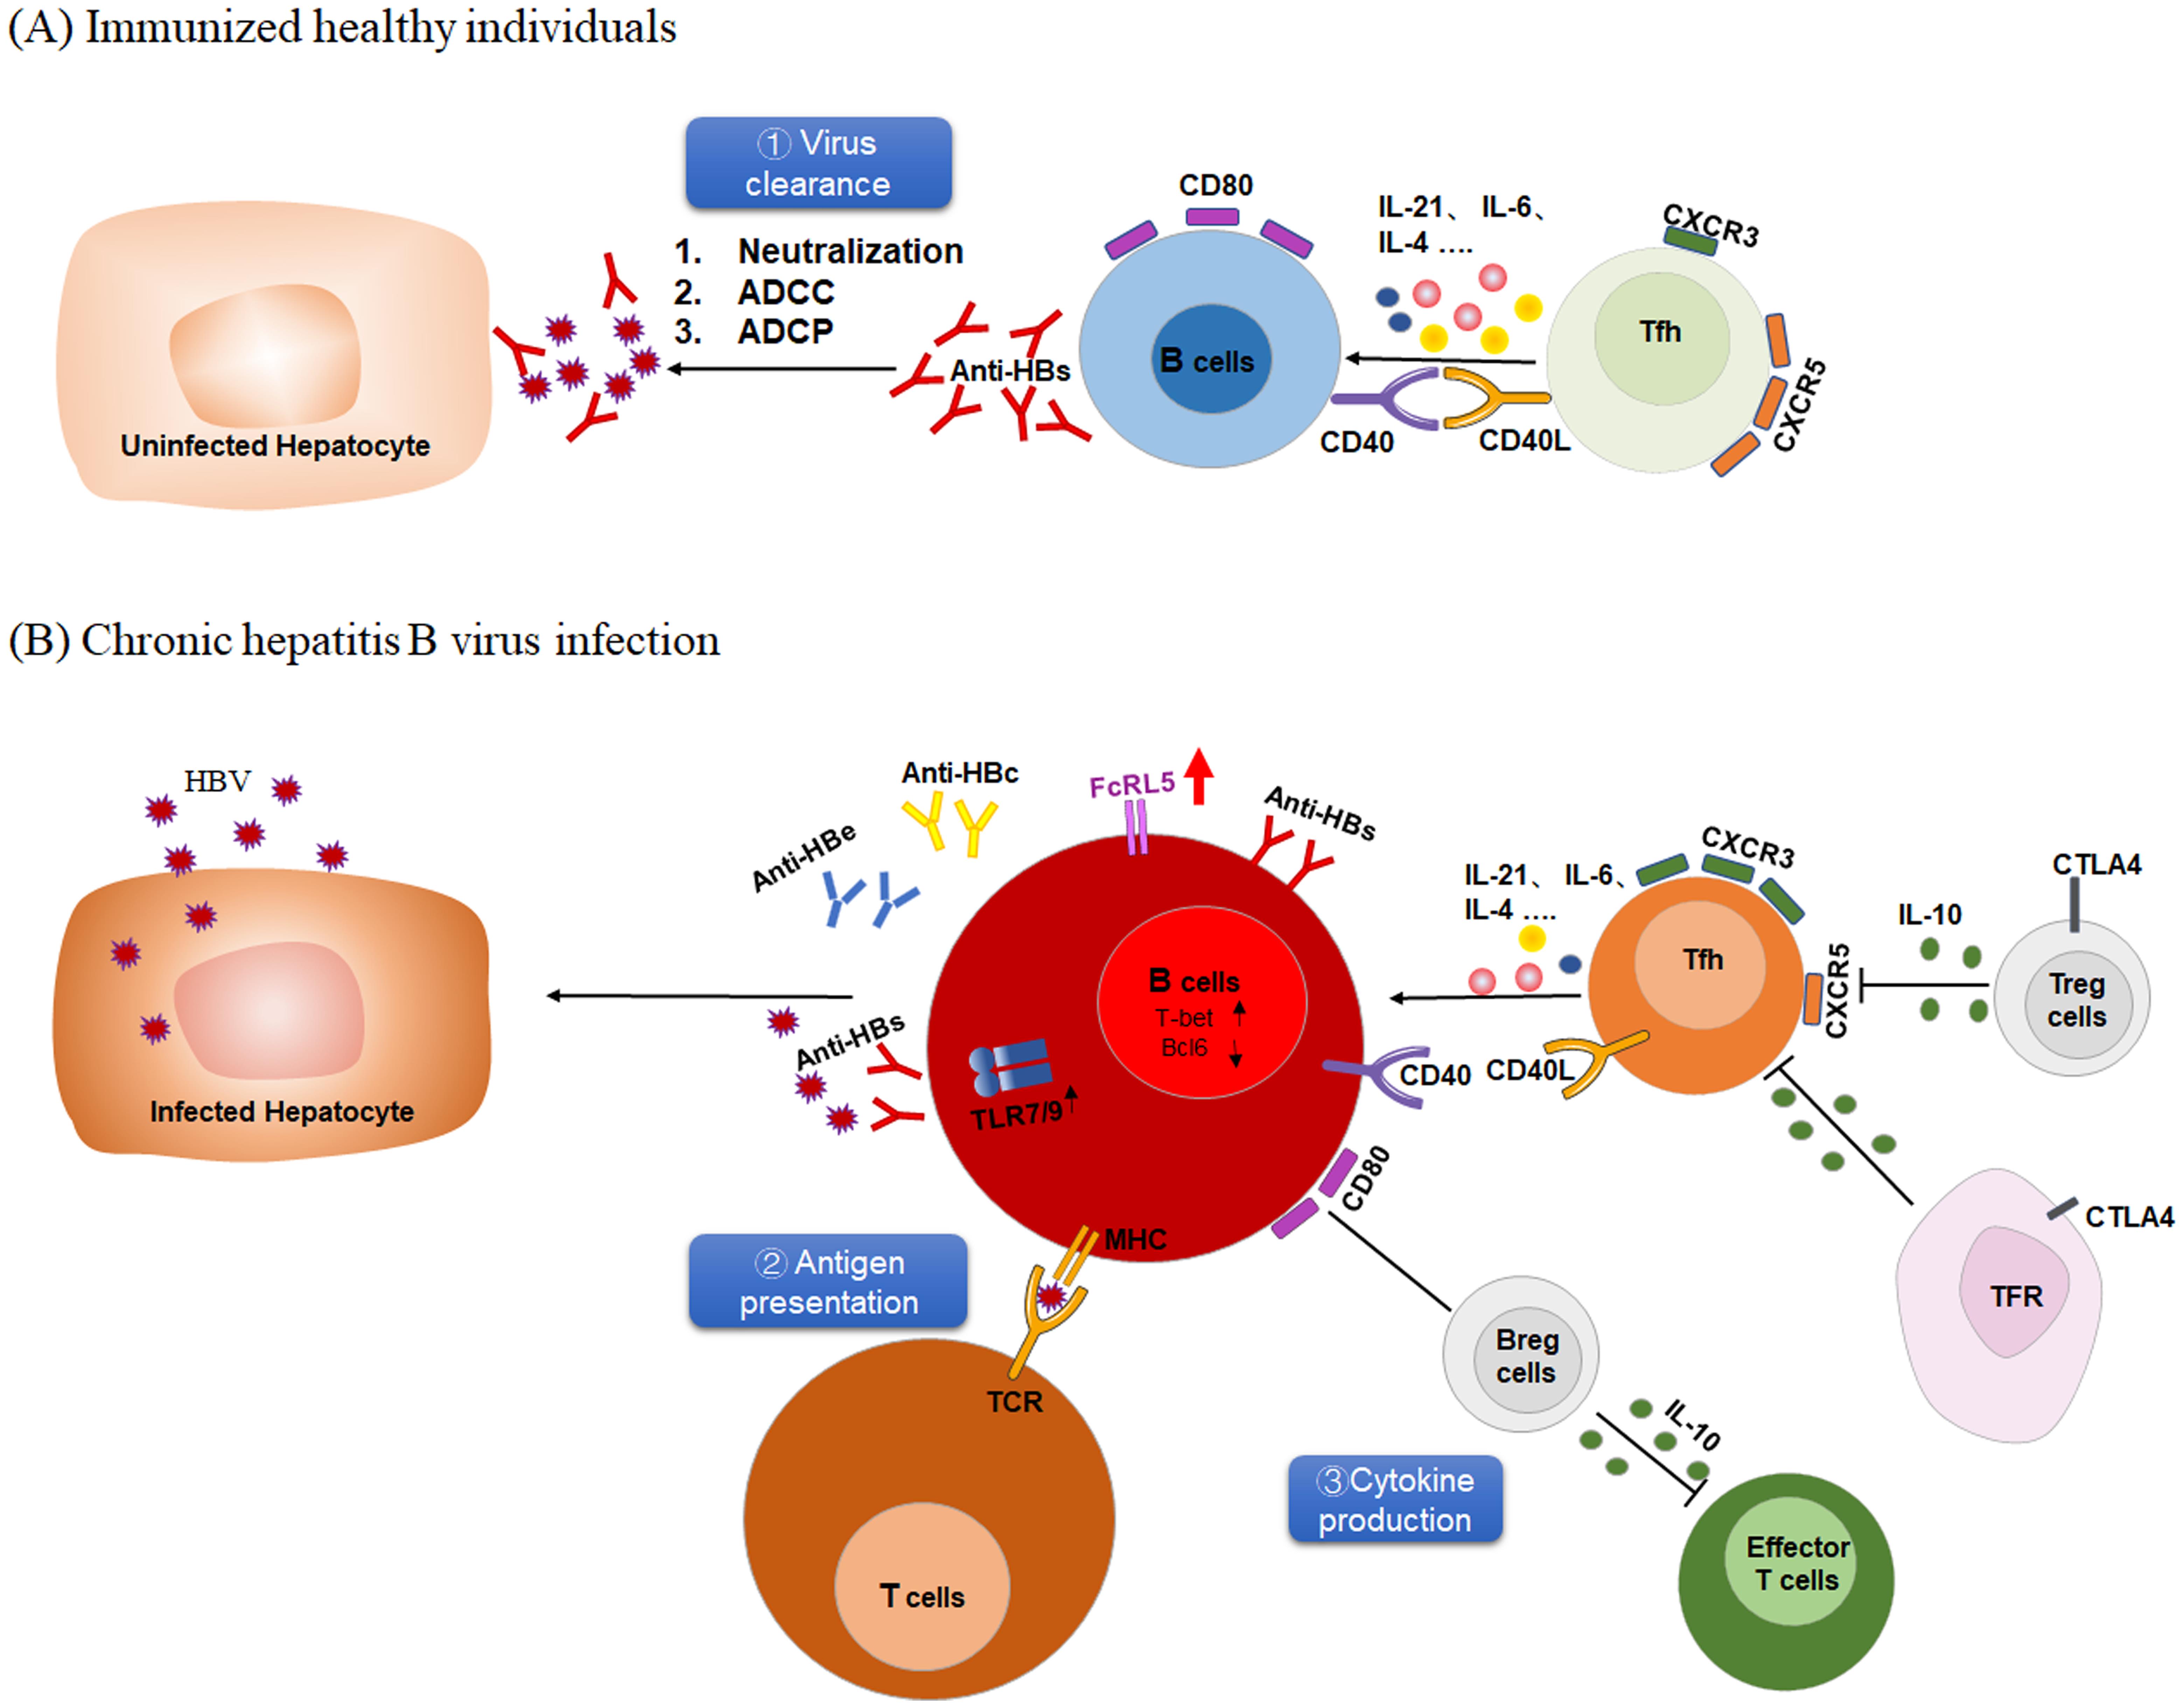 B cell-mediated humoral immunity in immunized healthy individuals and CHB patients.